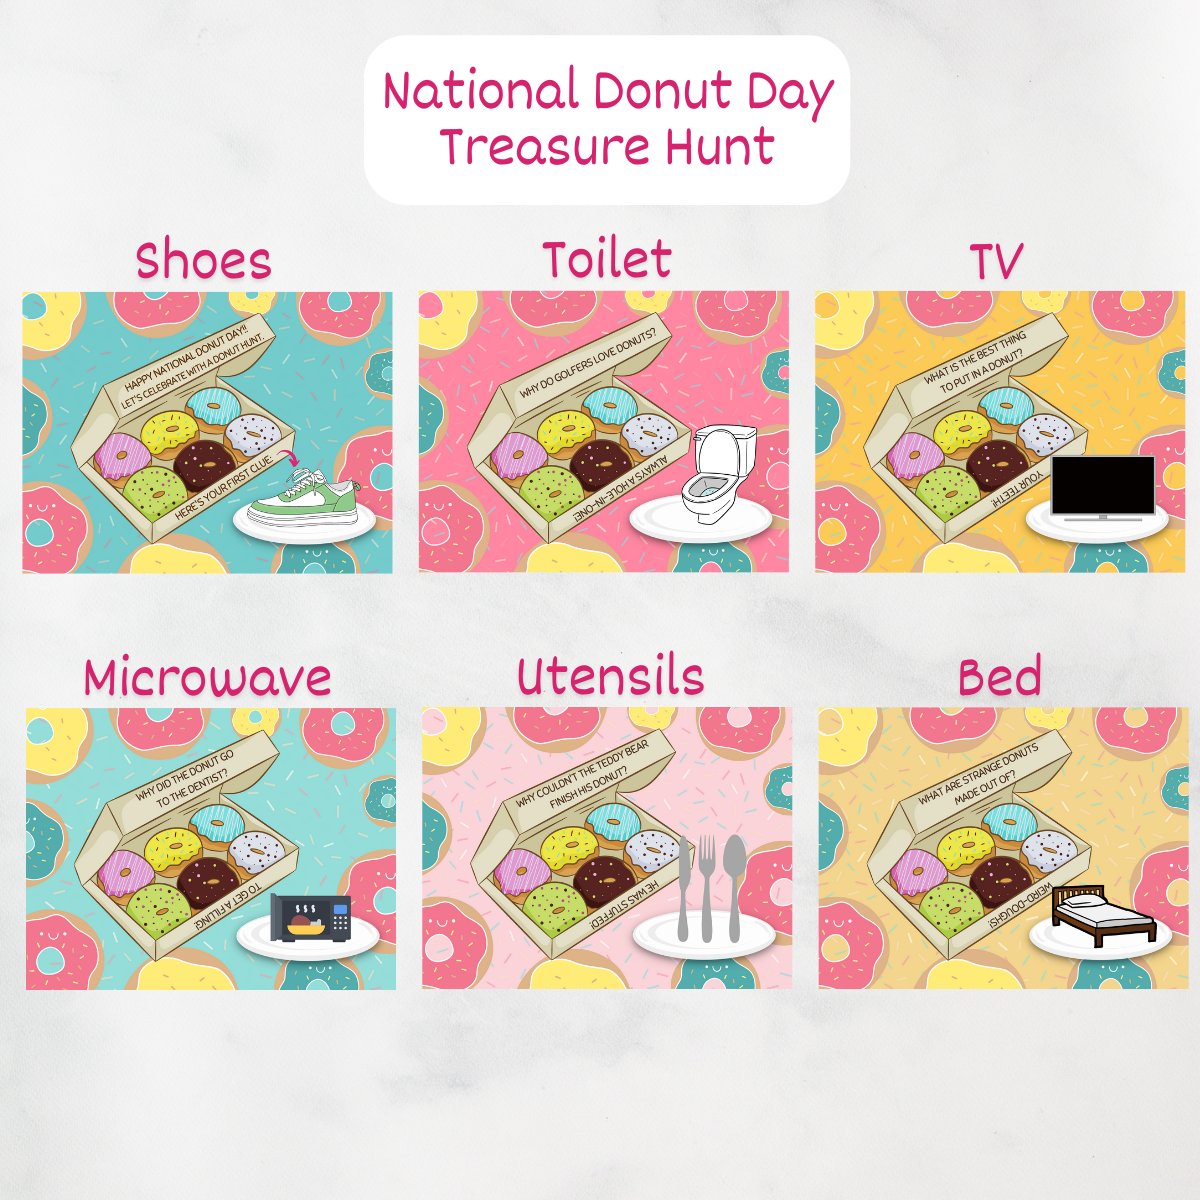 A display of the clue cards for the National Donut Day treasure hunt - to be hidden at shoes, toilet, tv, microwave, utensils, and bed.